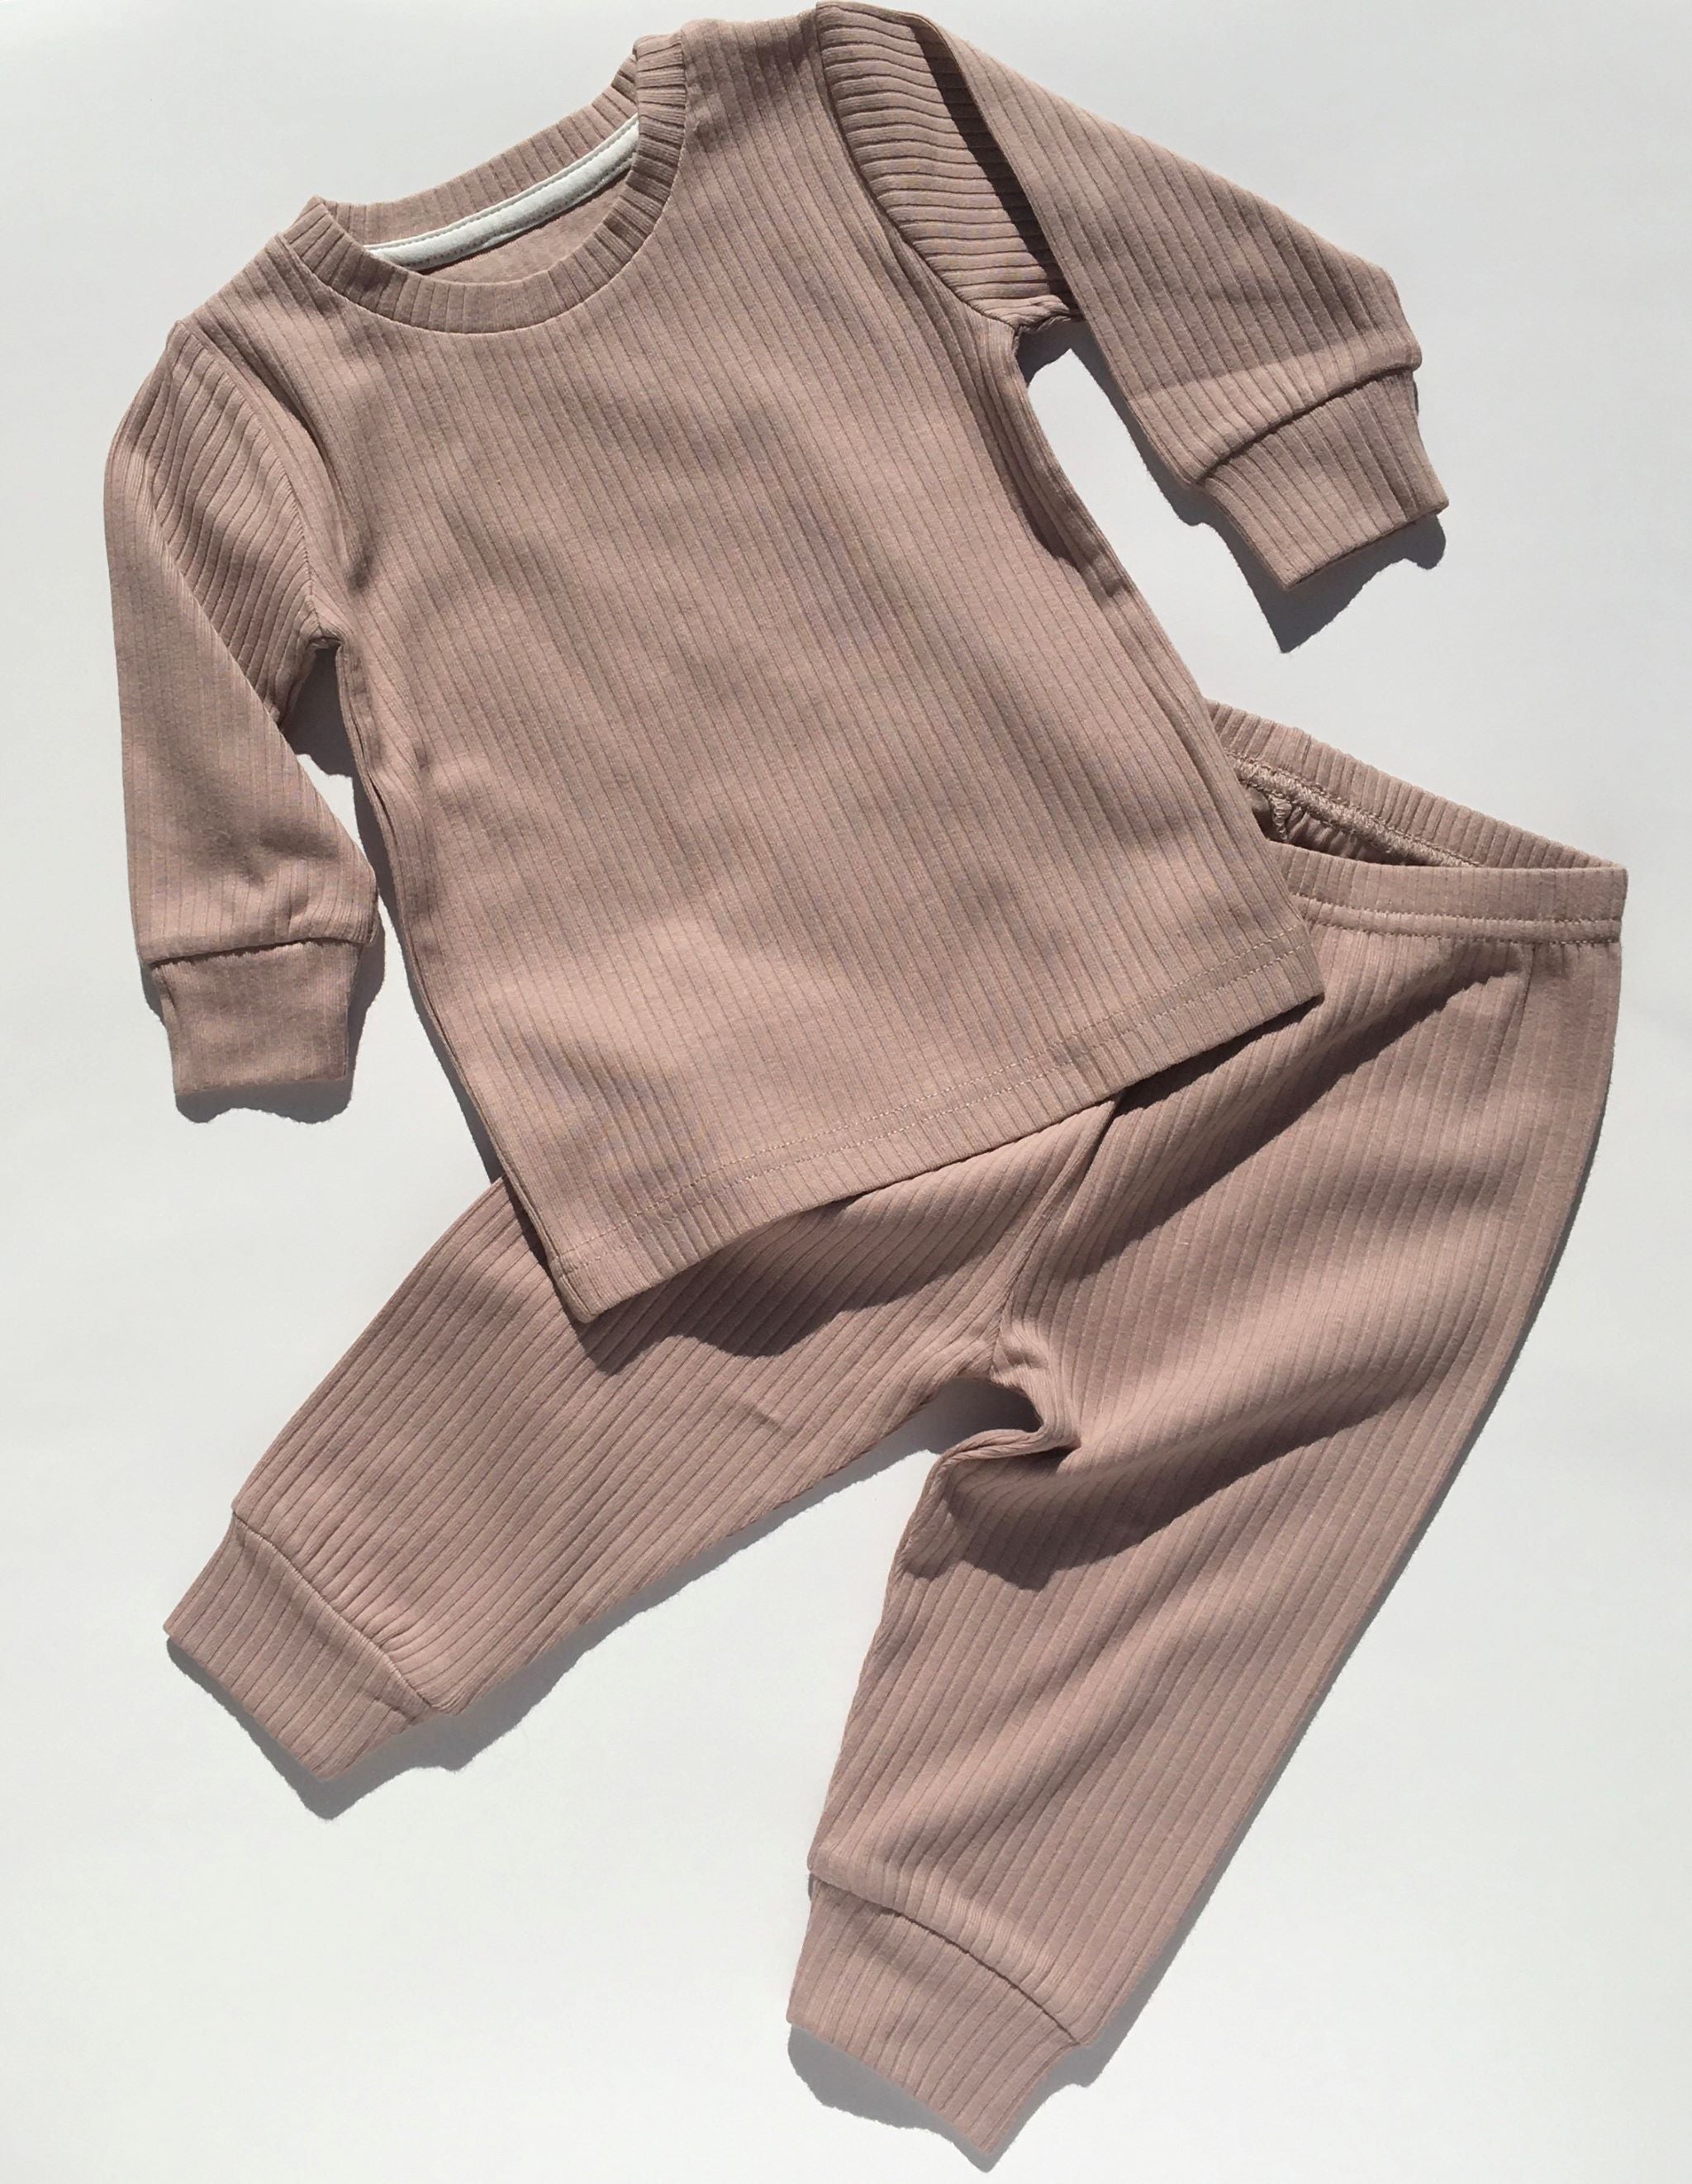 2 piece ribbed pajama set in lavender.  The set includes a long sleeve top and matching pull on pants,  It is made from soft, GOTS certified organic cotton.  